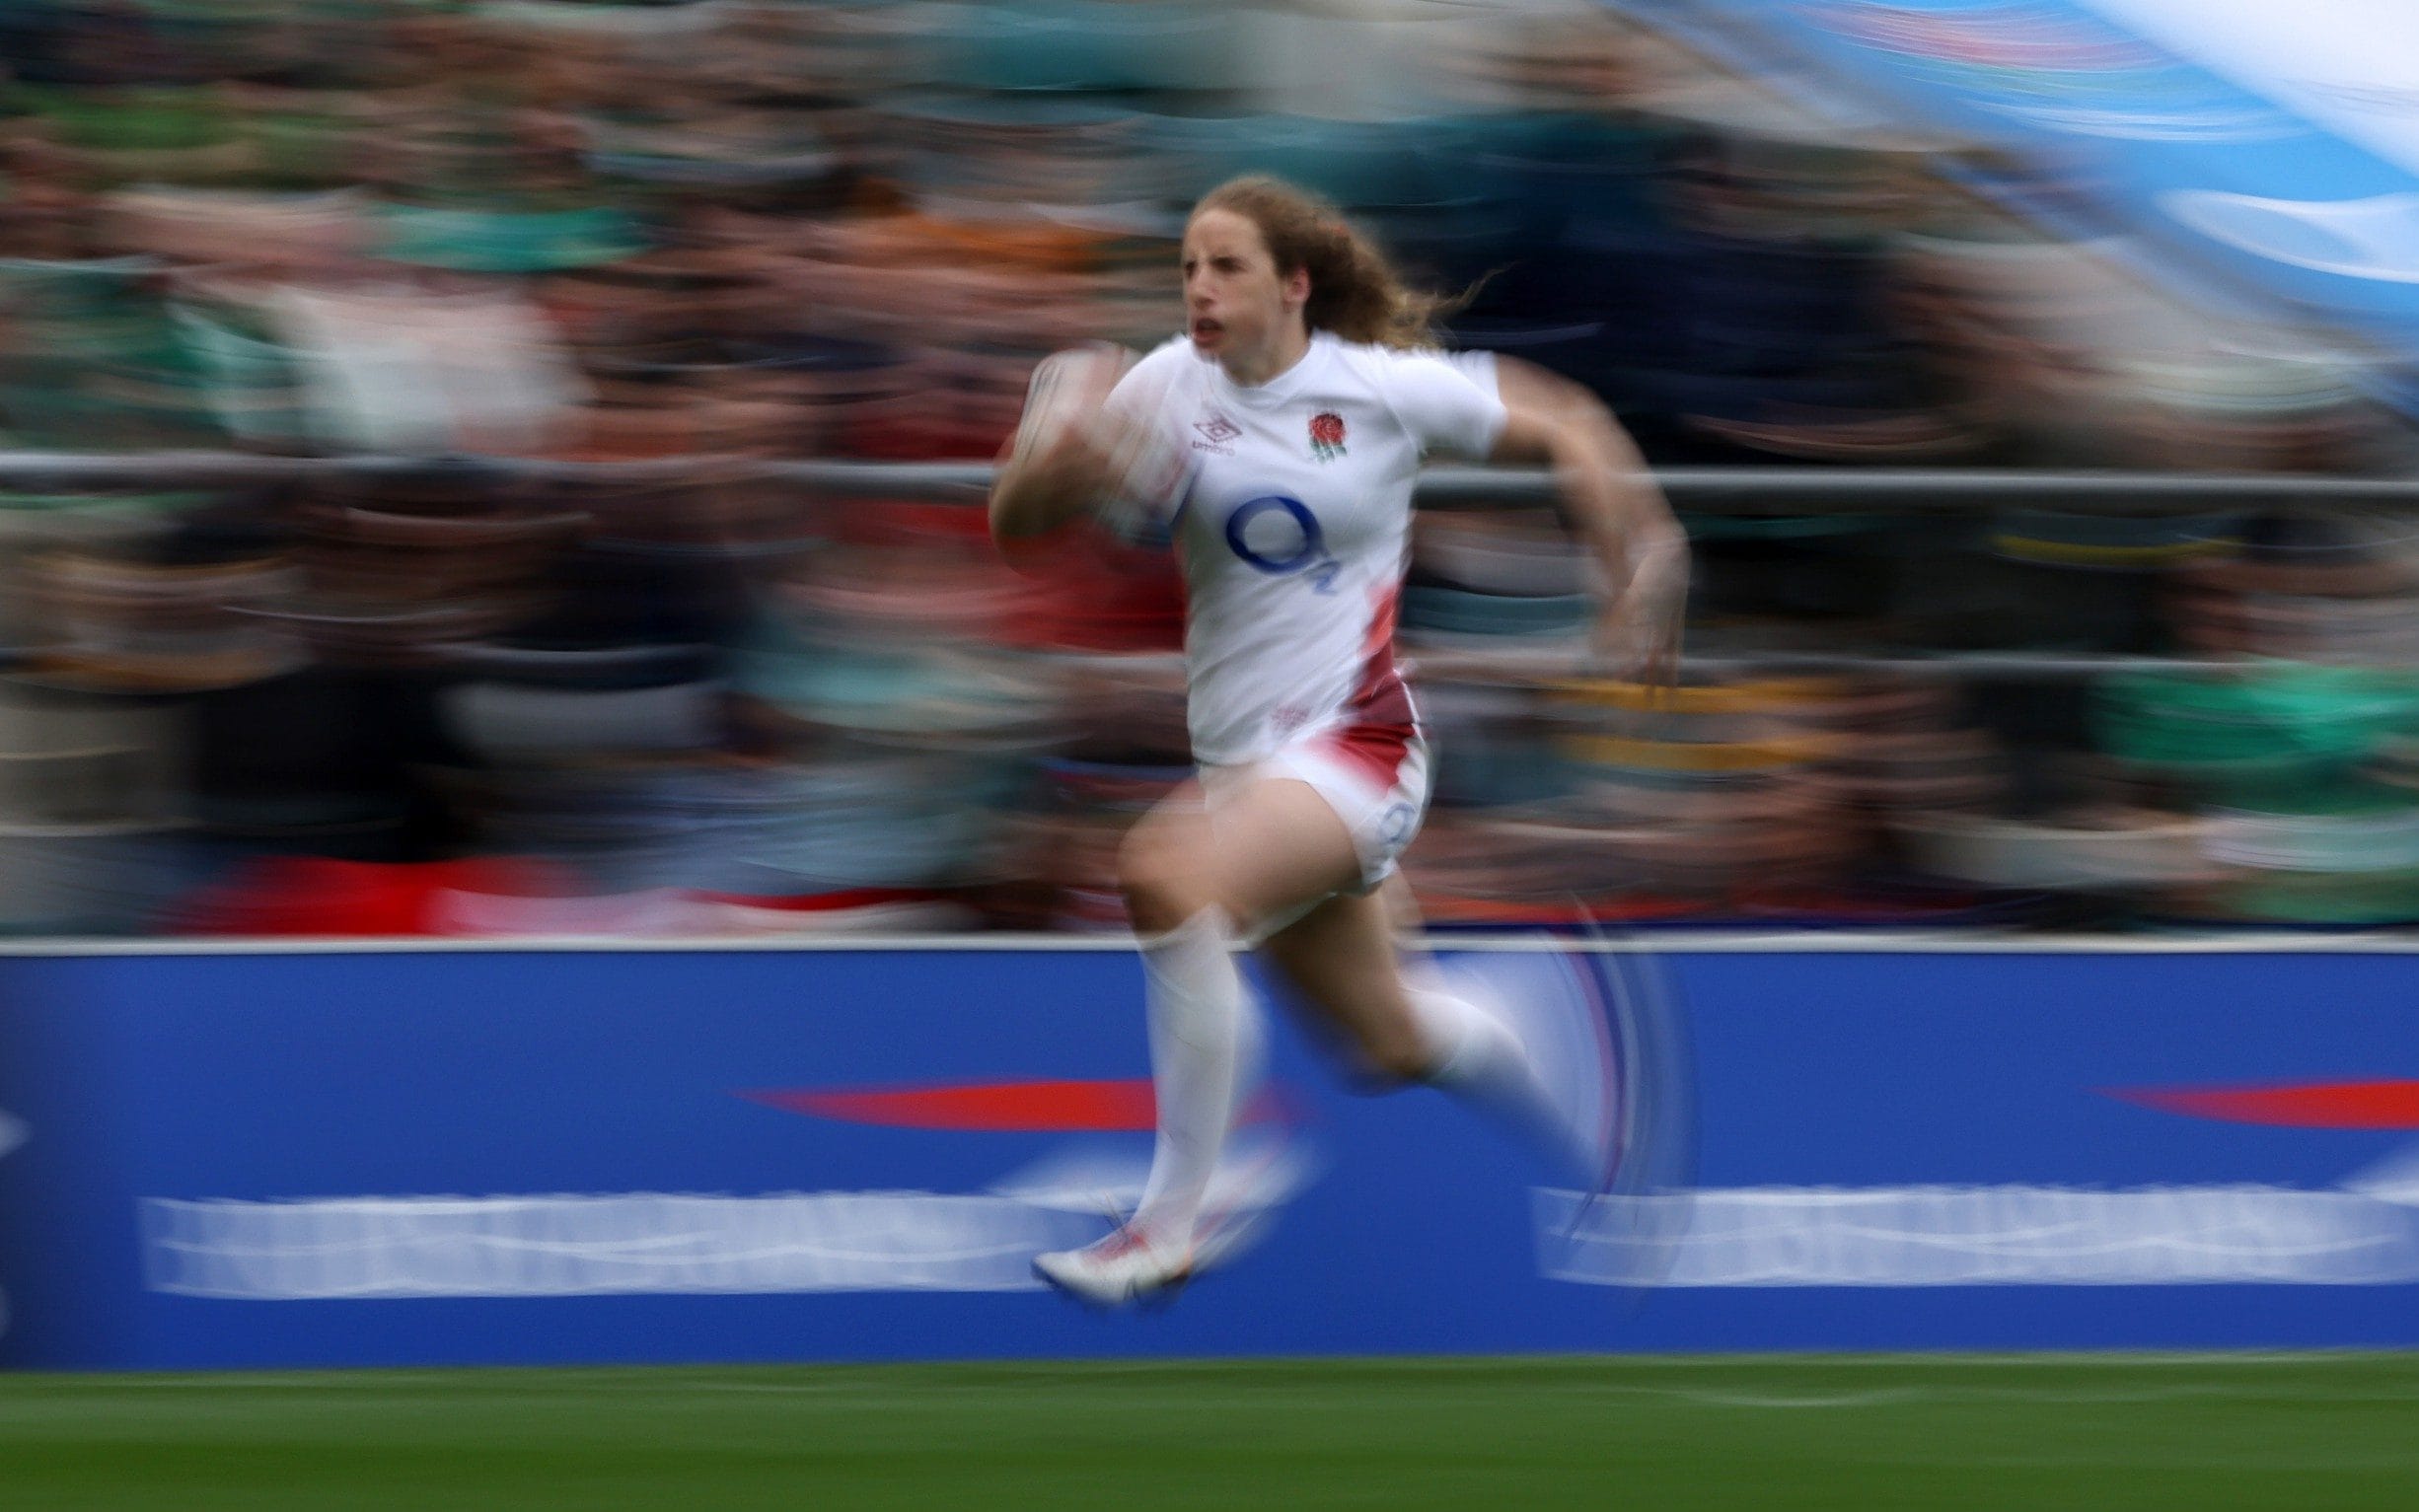 england thrash ireland 88-10 in women’s six nations rout